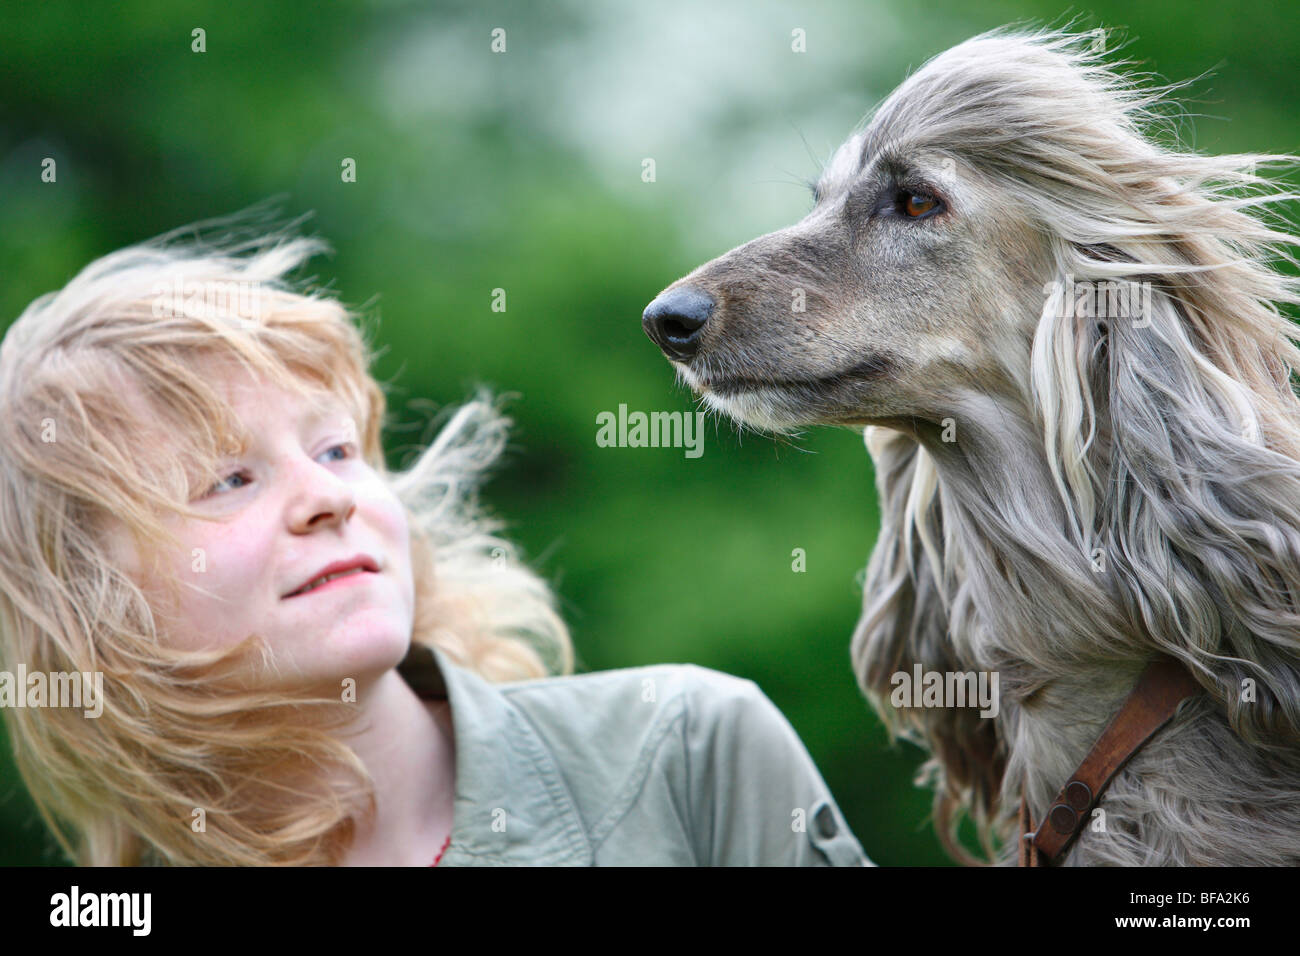 Afghanistan Hound, Afghan Hound (Canis lupus f. familiaris), girl with his dog, their long hair blowing in the wind Stock Photo